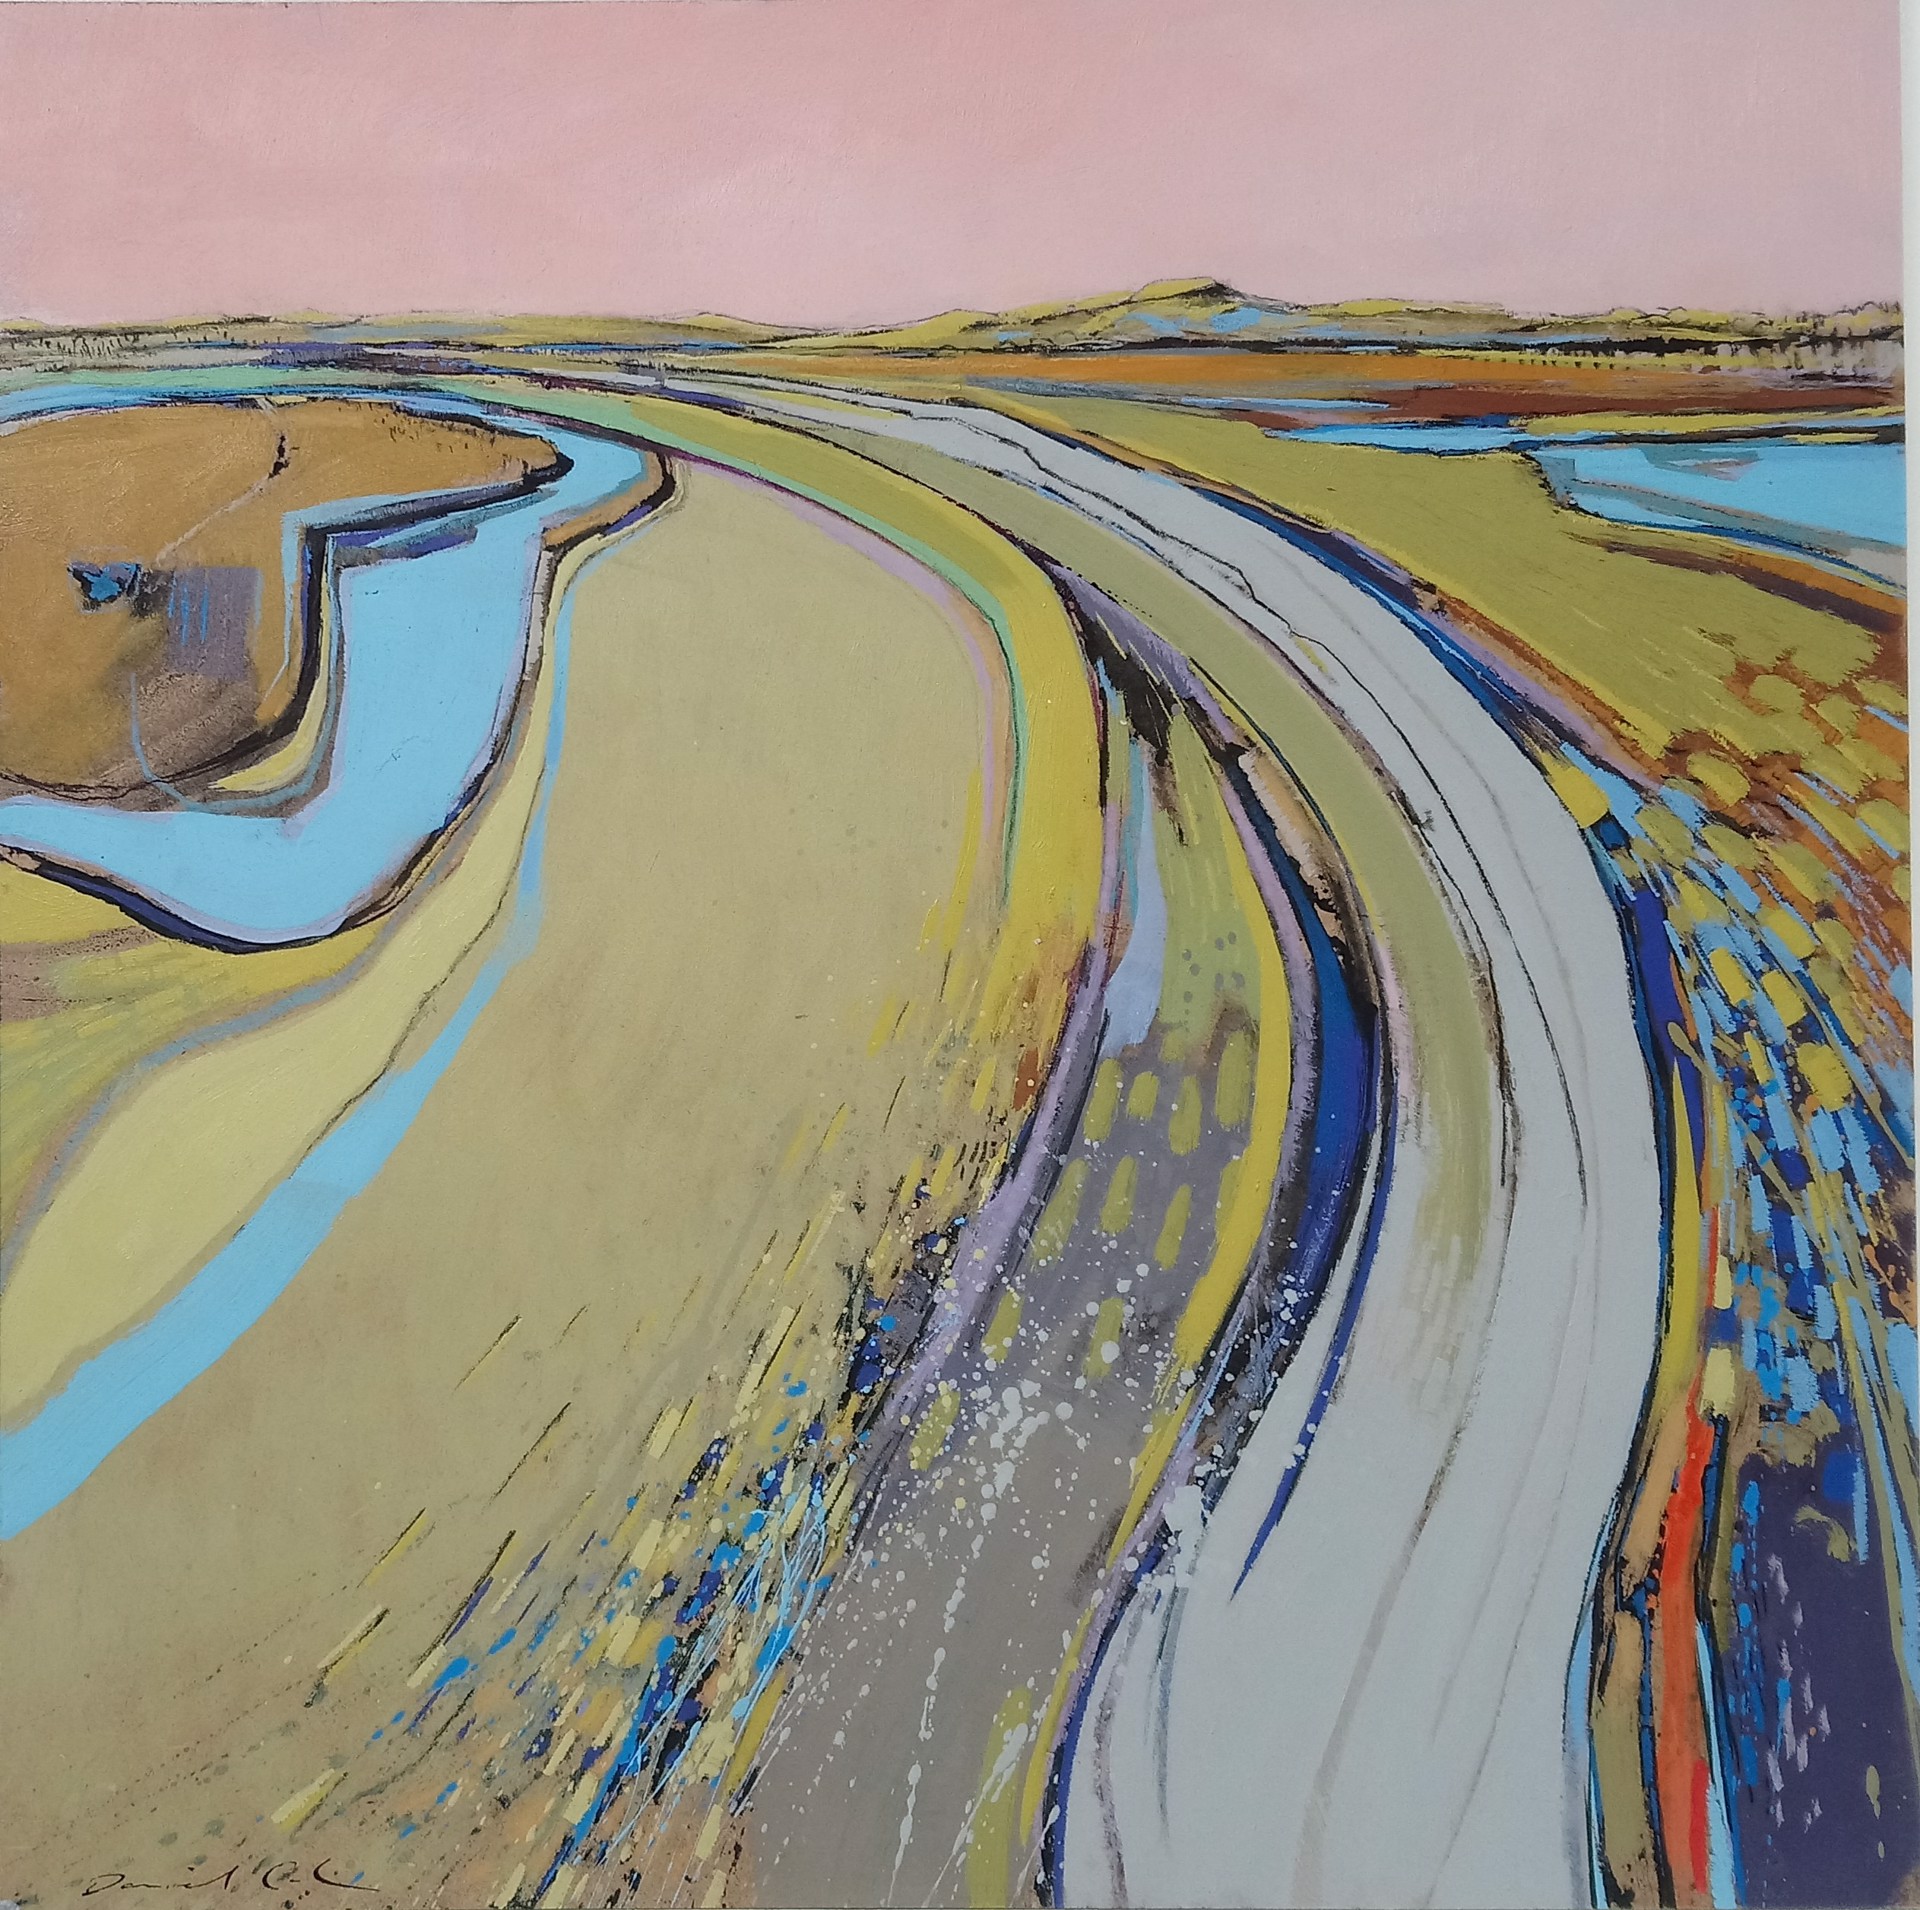 Through The Saltmarsh to the Dunes, Norfolk by Daniel Cole